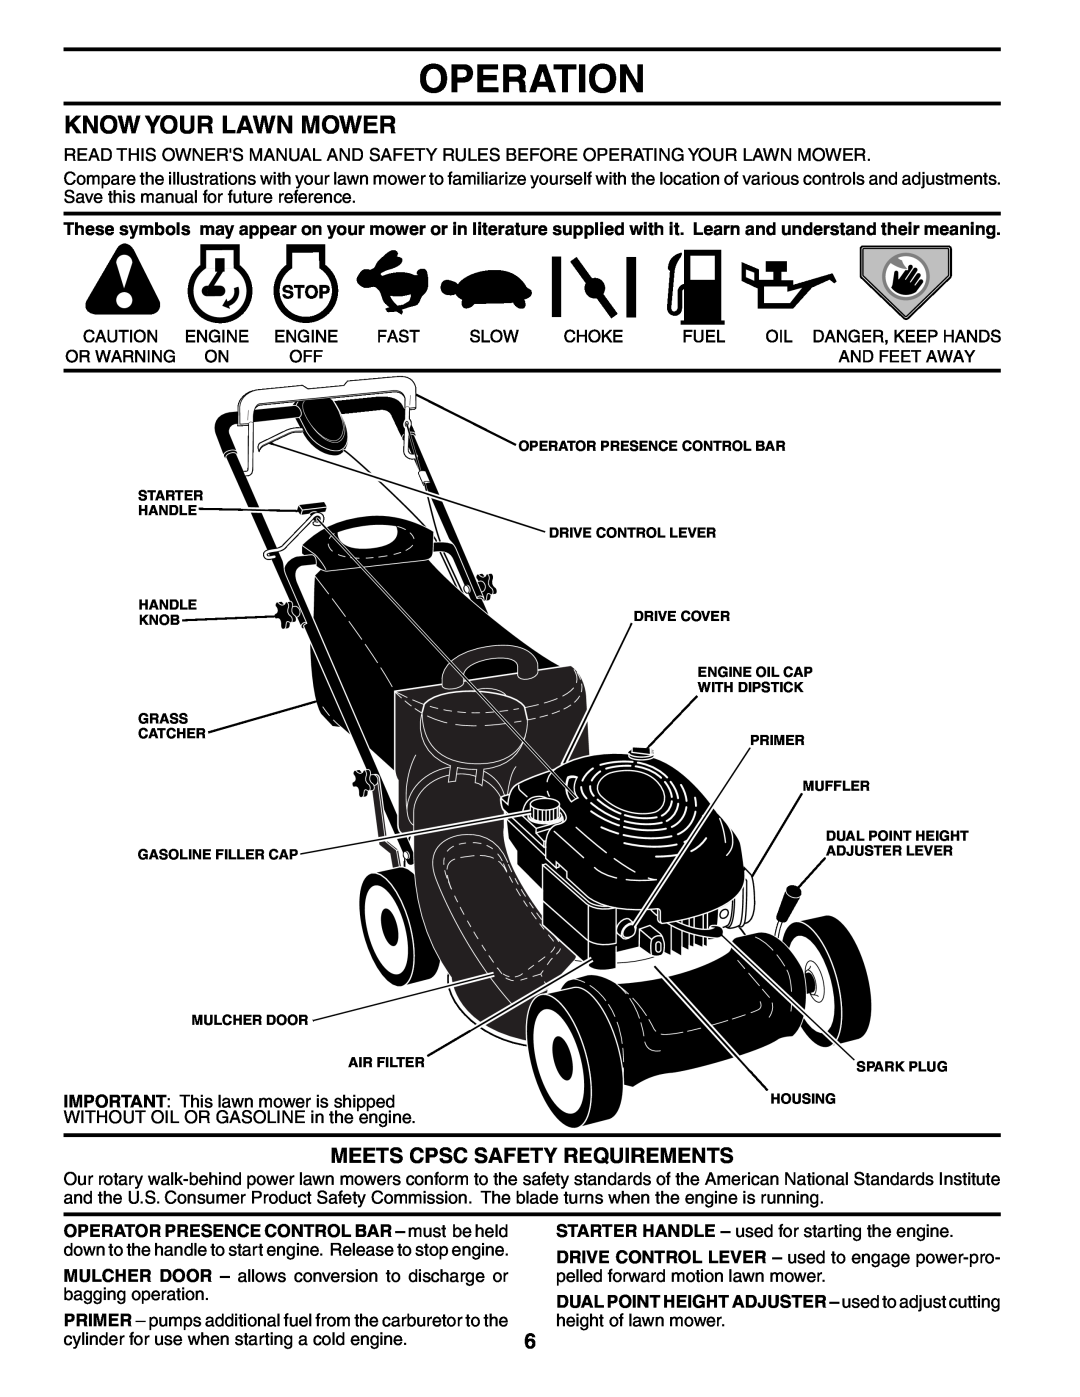 Husqvarna 67521 HV owner manual Operation, Know Your Lawn Mower, Meets Cpsc Safety Requirements 